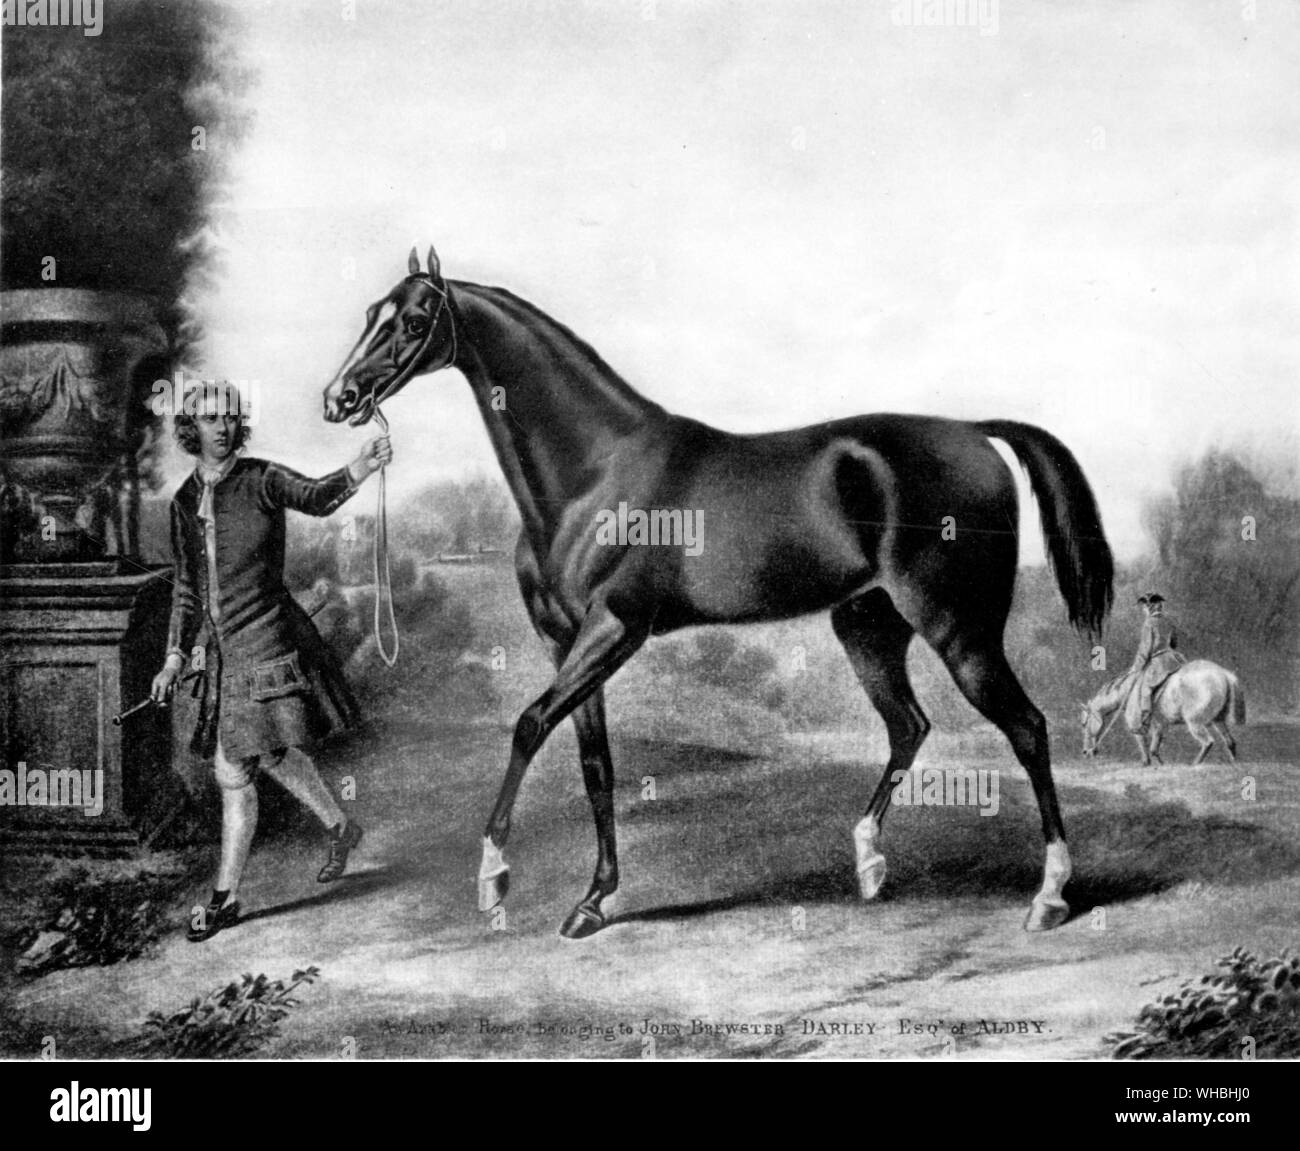 The Darley Arabian. This horse was foaled in 1700. he was about 20 years younger than Byerley's. He was bought by Thomas Darley in Aleppo in 1704, who sent him to his brother Richard at Aldby, Yorkshire. He stood there until 1730, latterly the property of John Brewster Darley. One of his sons was Bulle Rock, the first thoroughbred to go to America. Others were the two Childers, one of the first great thoroughbred racehorses, the other the progenitor, by Eclipse, of most of today's thoroughbreds (see pp. 78-80). Thoroughbred racehorses are descended from Arab stallions.. The History of Horse Stock Photo